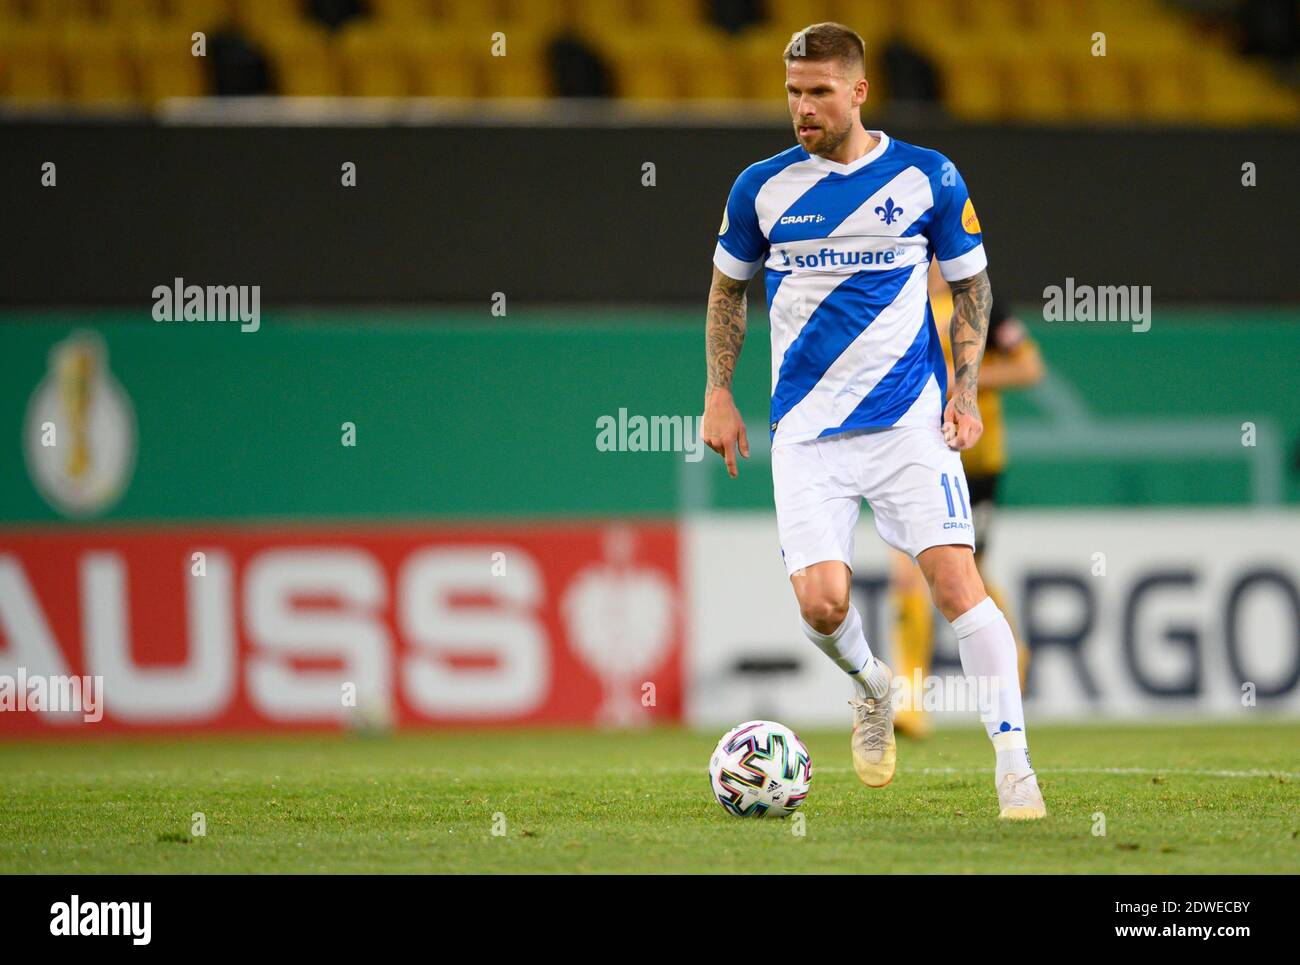 Dresden, Germany. 22nd Dec, 2020. Football: DFB Cup, SG Dynamo Dresden - SV Darmstadt 98, 2nd round, at Rudolf Harbig Stadium. Darmstadt's Tobias Kempe plays the ball. Credit: Robert Michael/dpa-Zentralbild/dpa - IMPORTANT NOTE: In accordance with the regulations of the DFL Deutsche Fußball Liga and/or the DFB Deutscher Fußball-Bund, it is prohibited to use or have used photographs taken in the stadium and/or of the match in the form of sequence pictures and/or video-like photo series./dpa/Alamy Live News Stock Photo